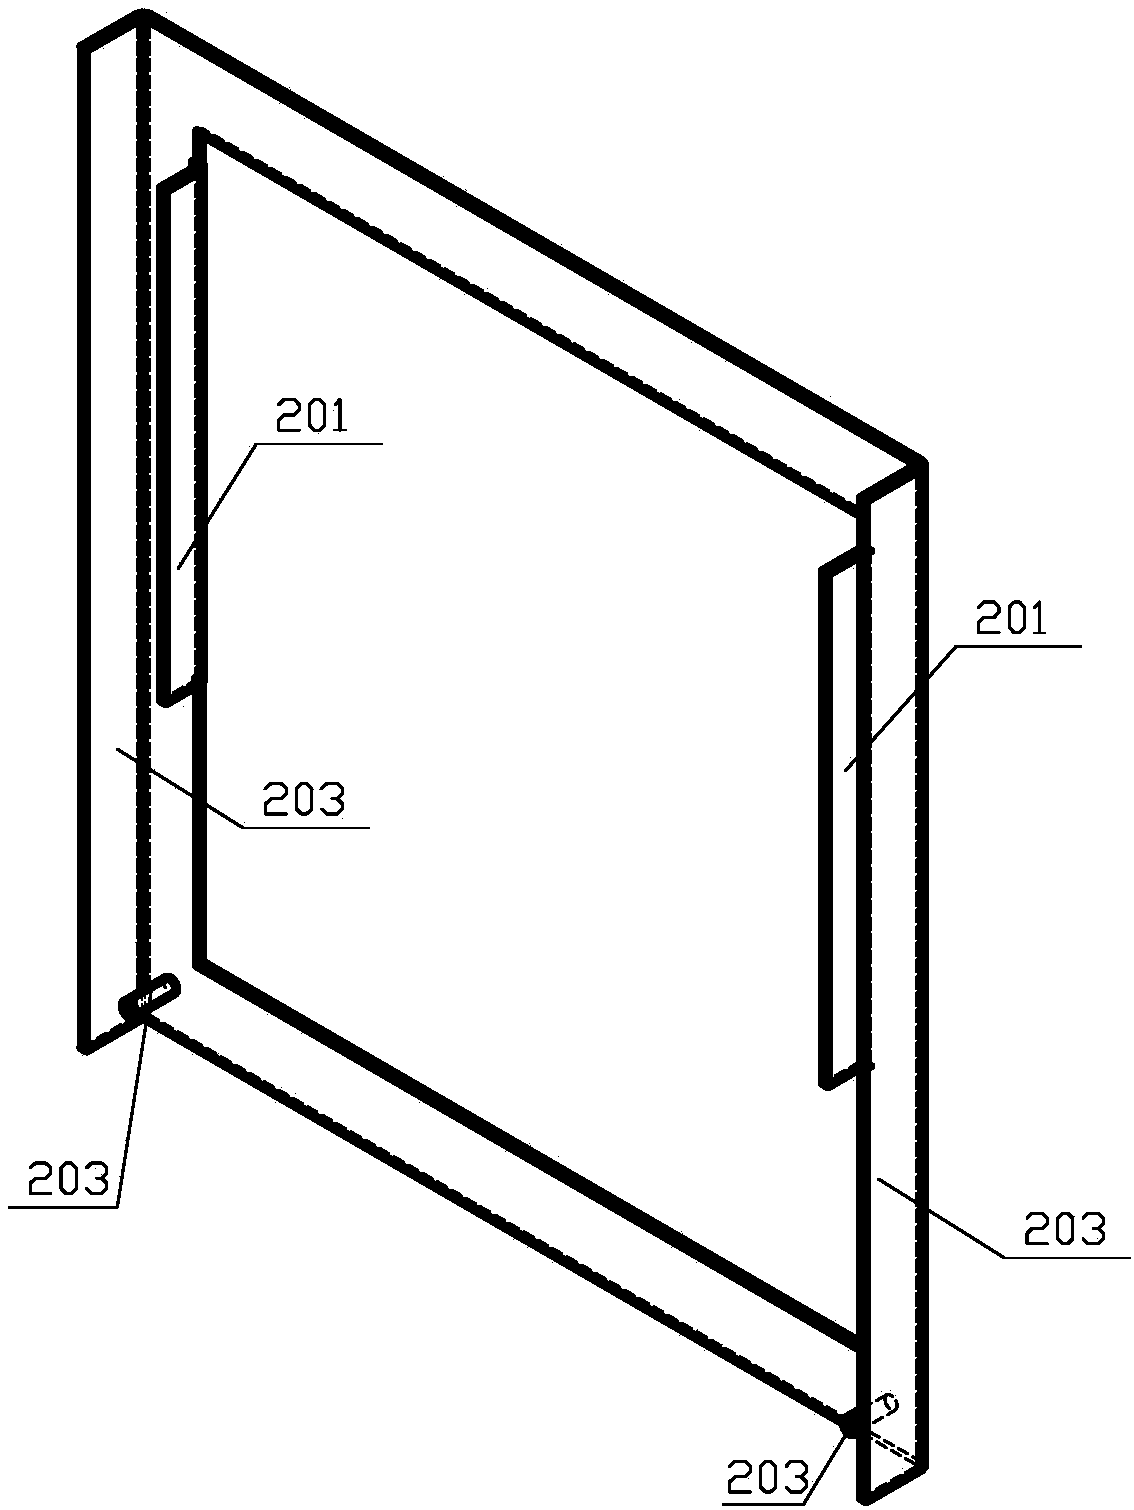 Self-positioning tool structure for assembling loop network switchgear cubicle instrument box